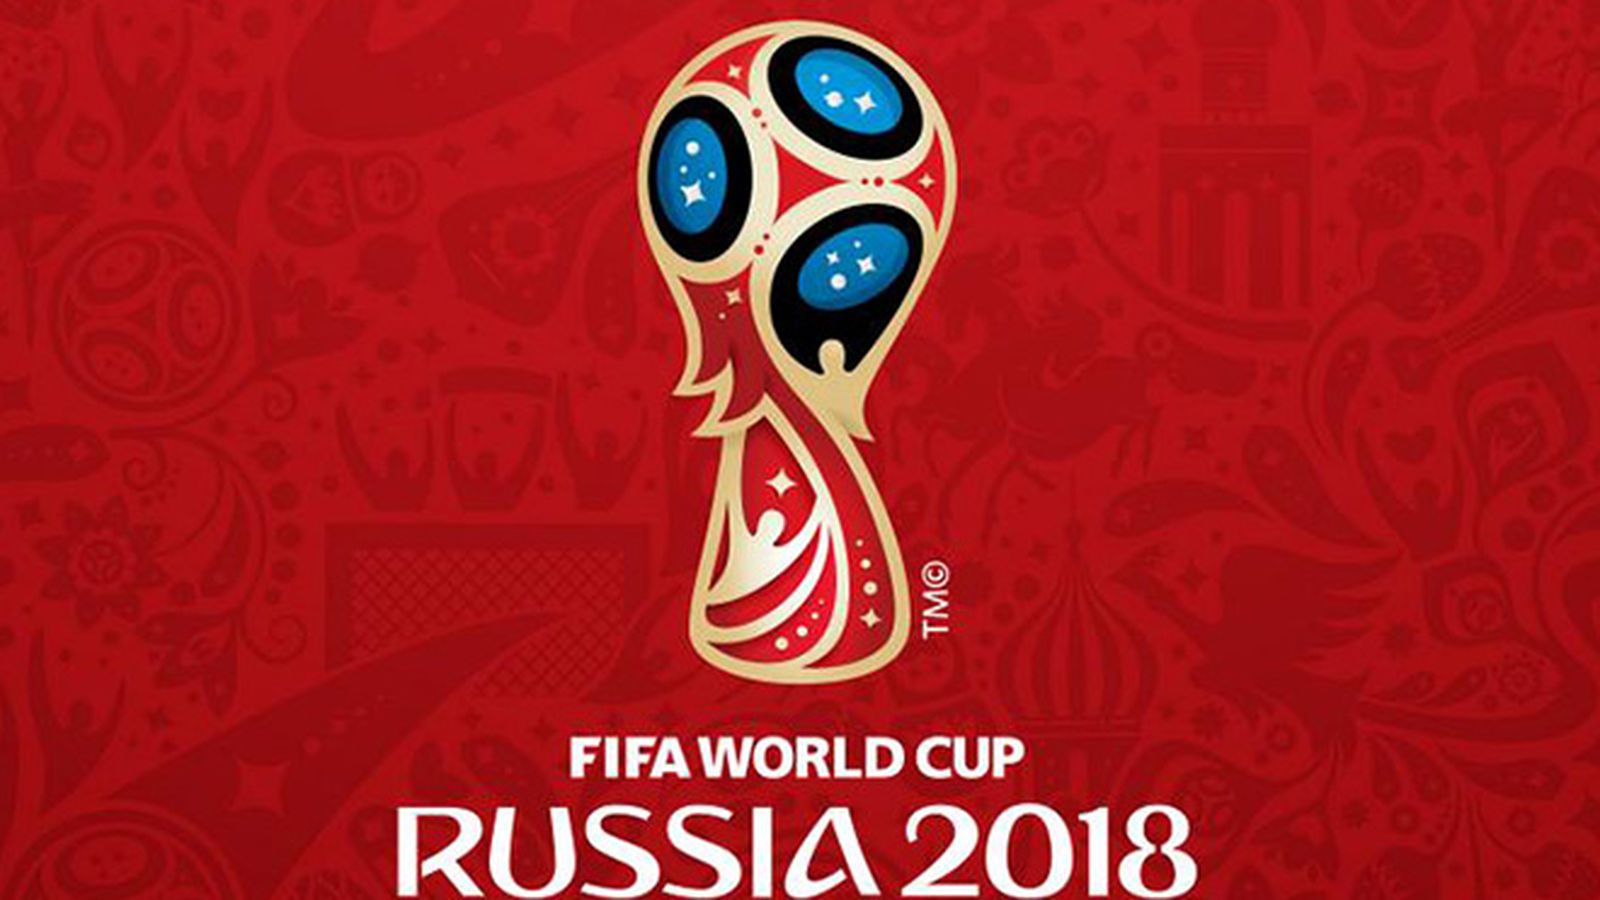 The world cup 2018